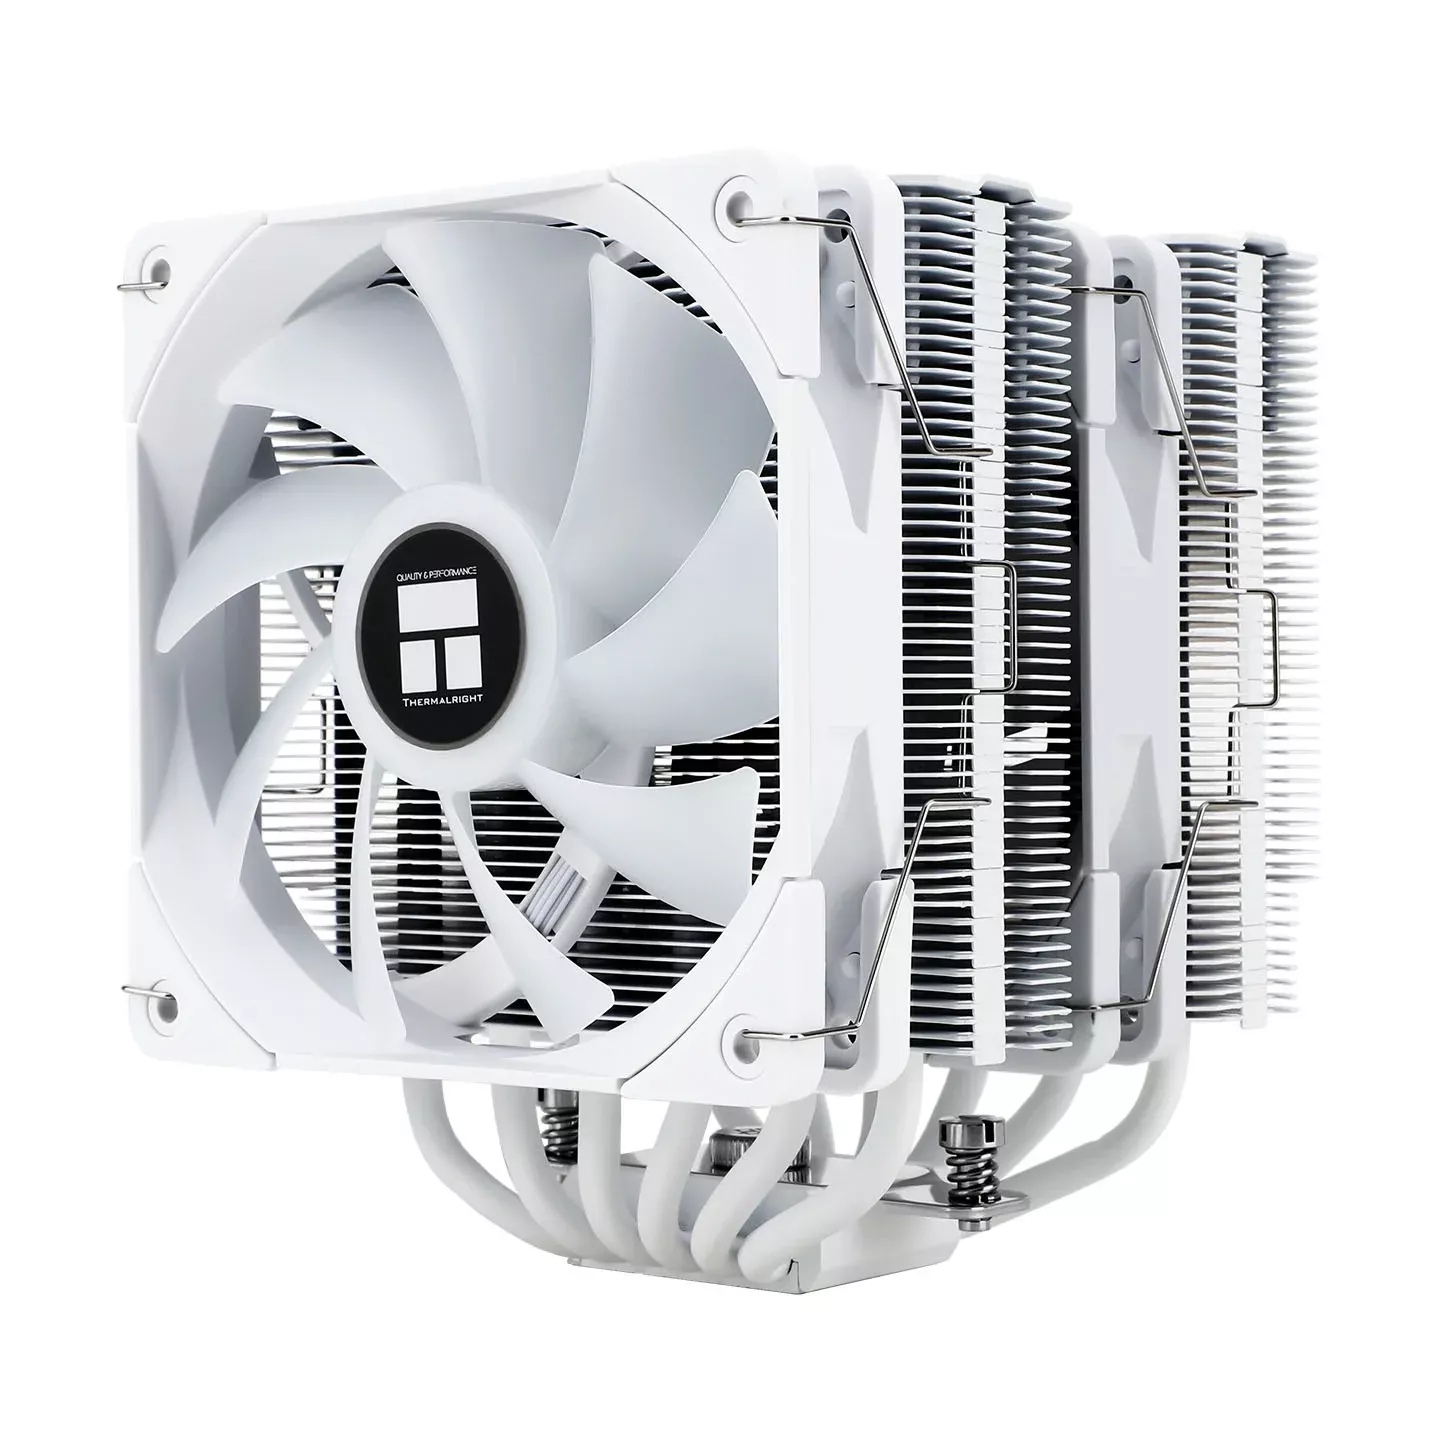 ThermalRight Assassin King 120 White - CPU Cooler Review 